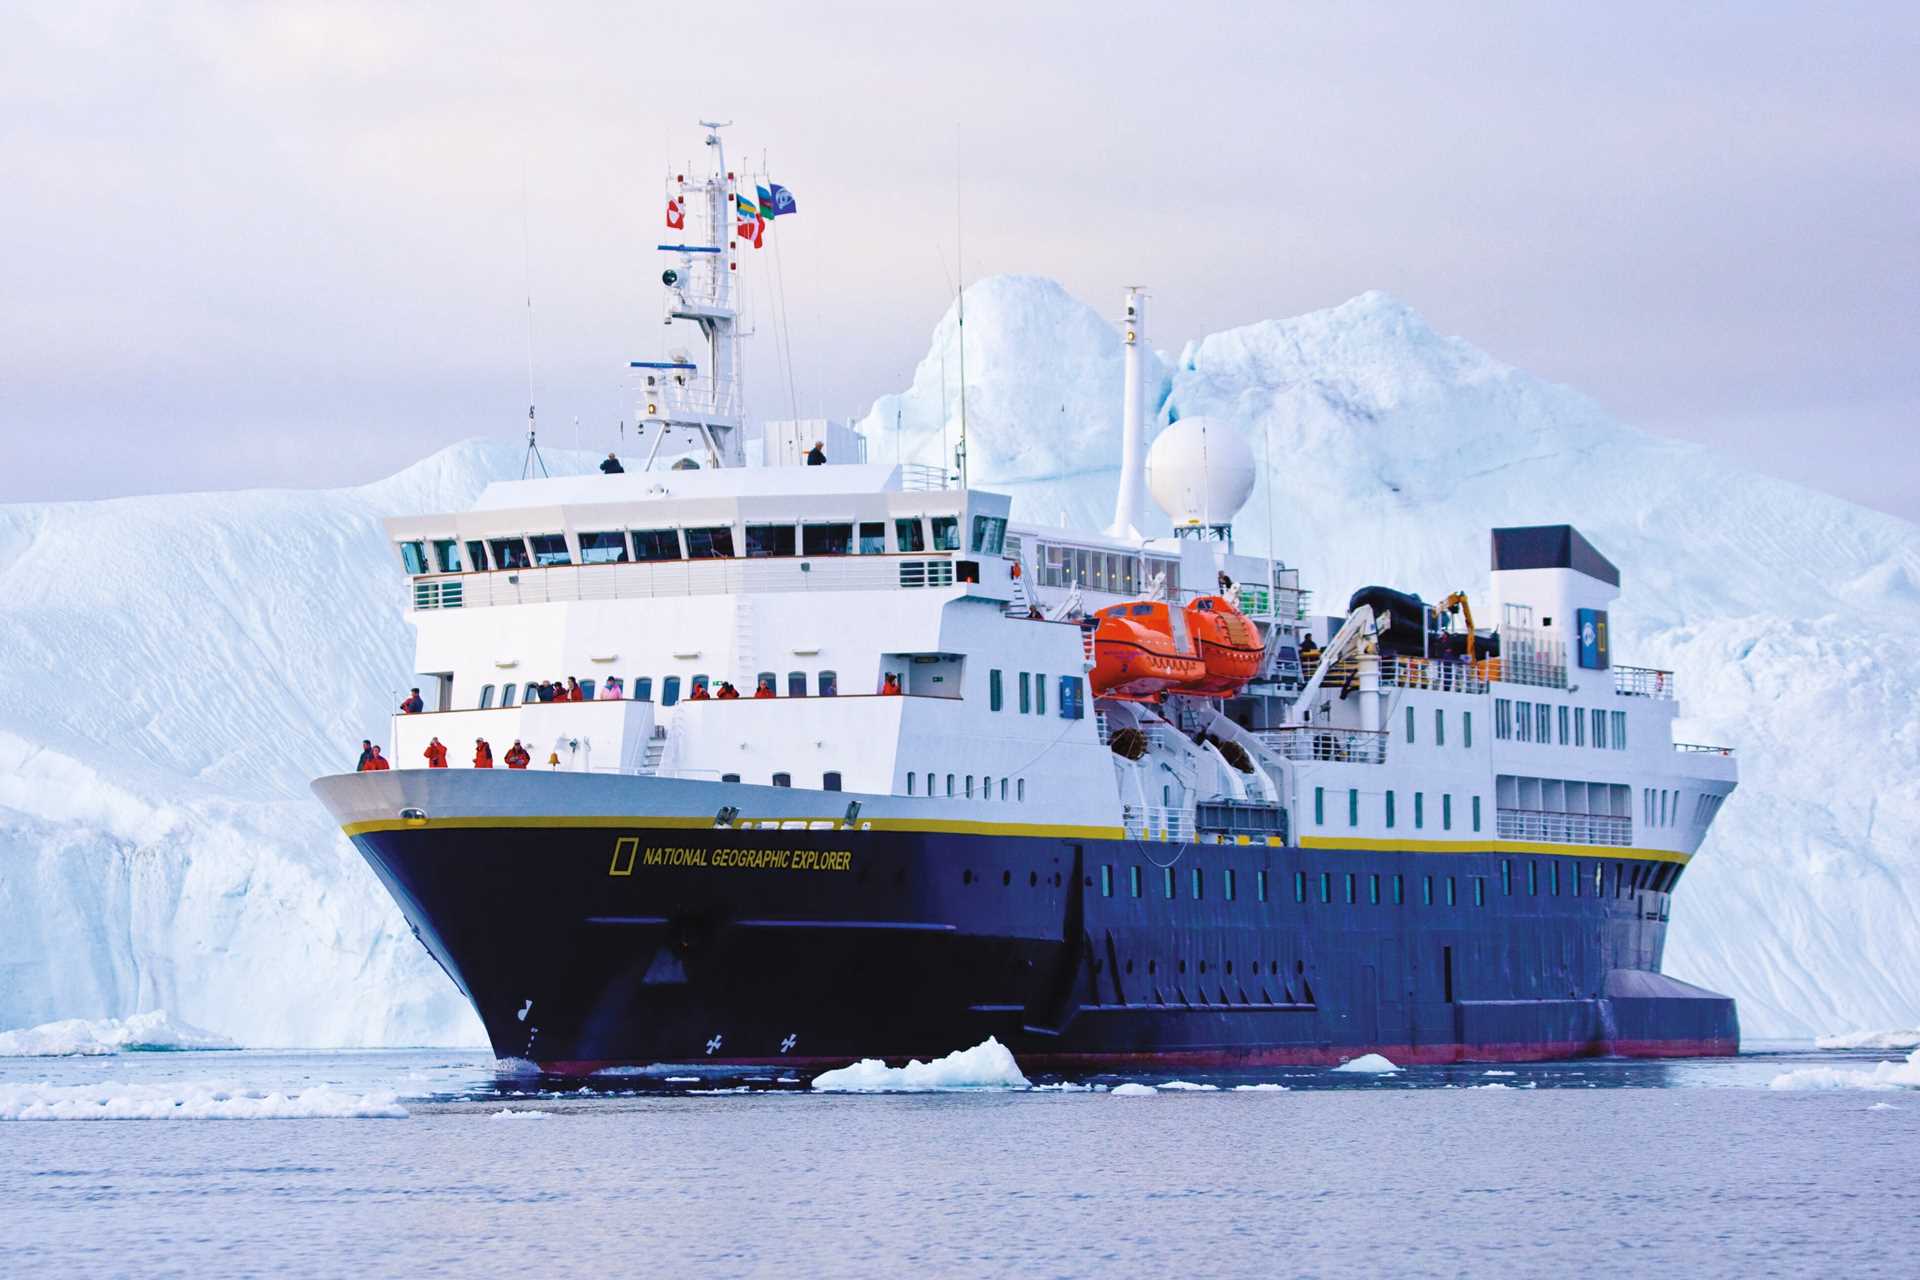 National Geographic Explorer anchored in front of an iceberg in Iluissat, Greenland